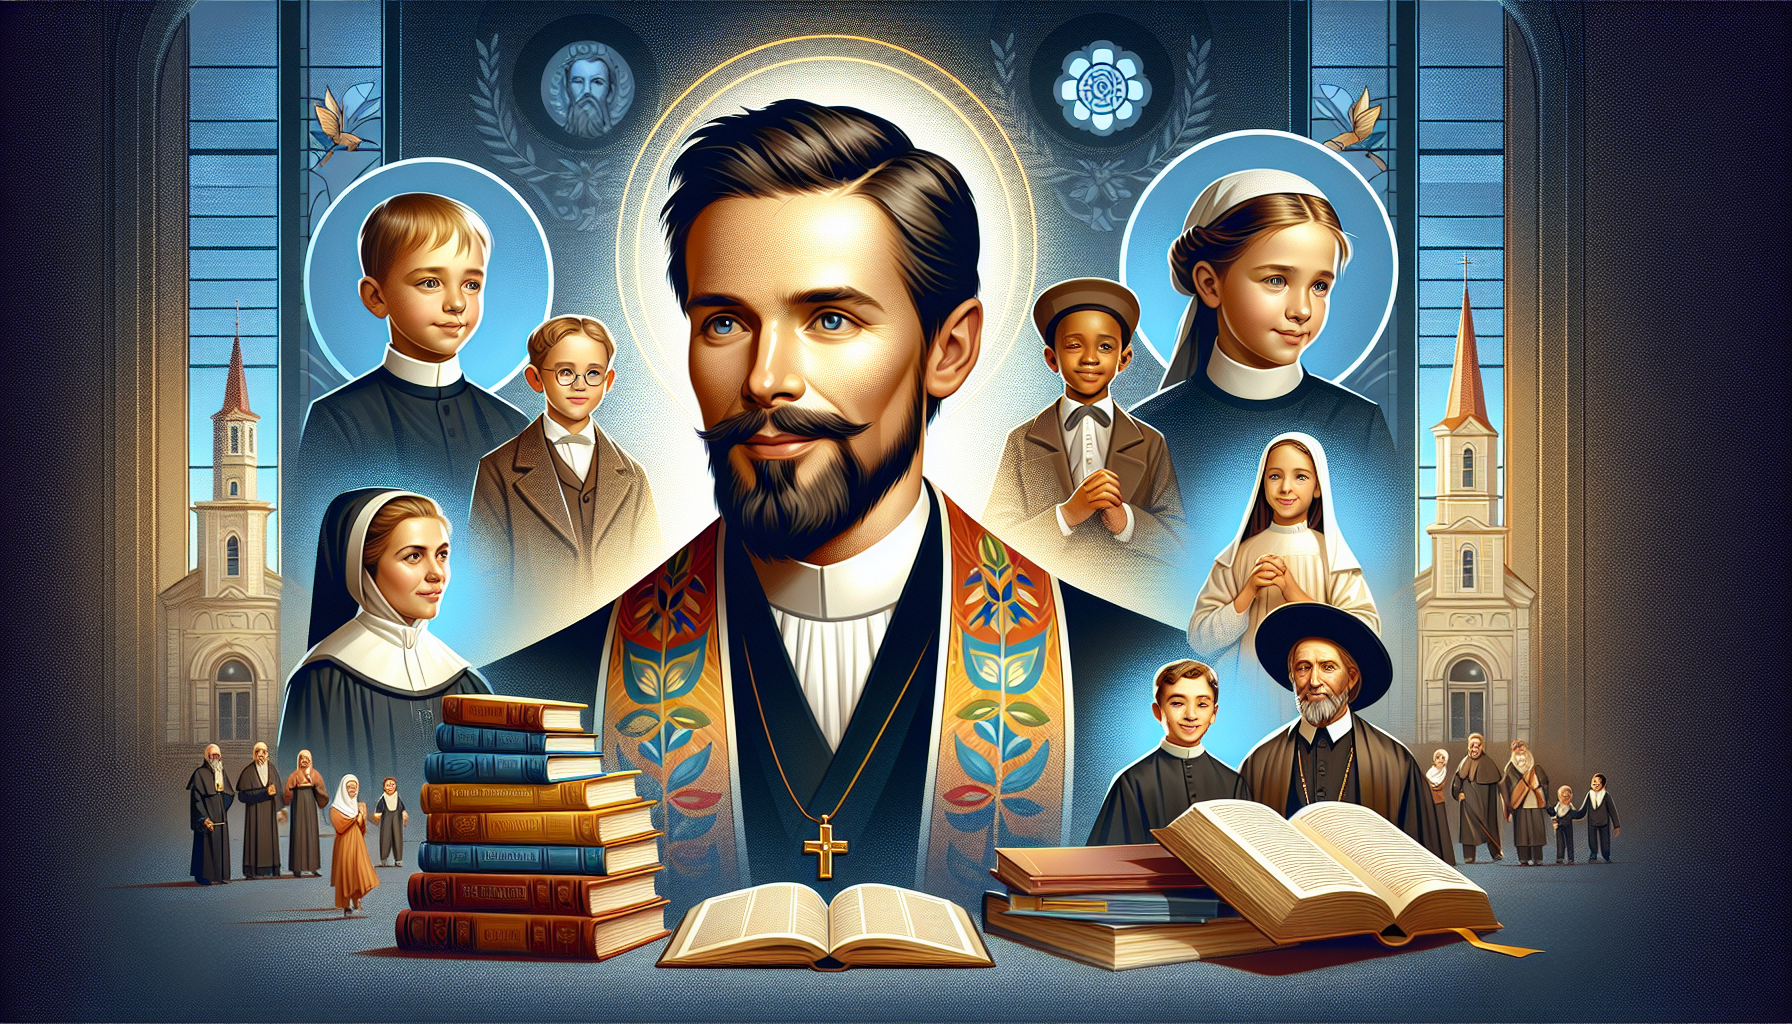 An inspirational and solemn portrait of Salesian priest Juan del Rizzo, surrounded by elements symbolizing his life's work, such as a church backdrop, children he educated, and books representing his